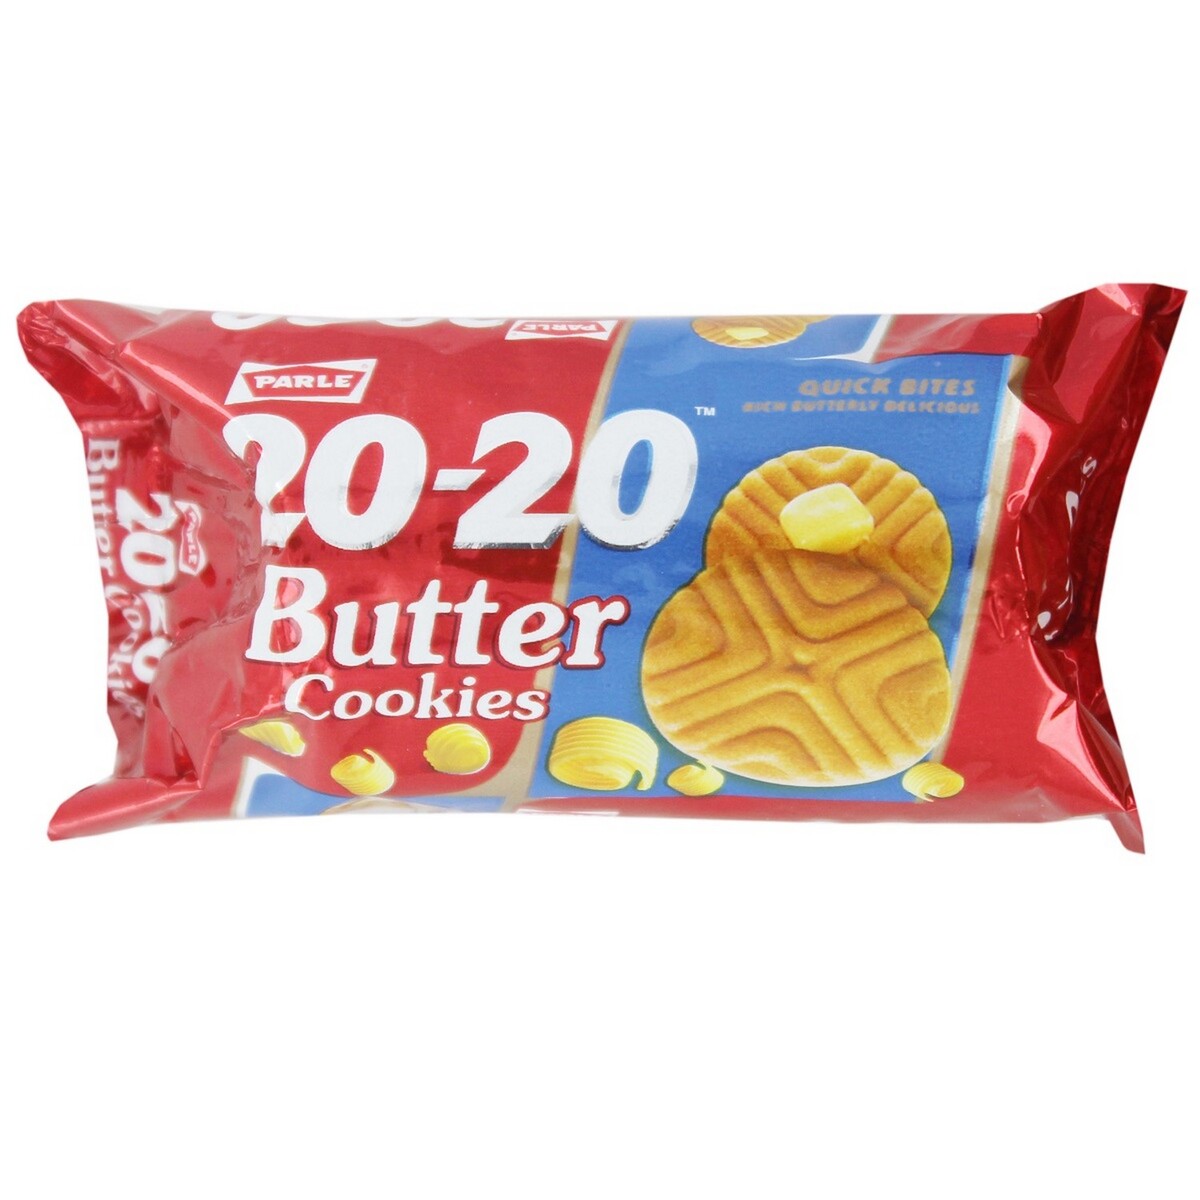 Parle 20-20 Butter Cookies 45g